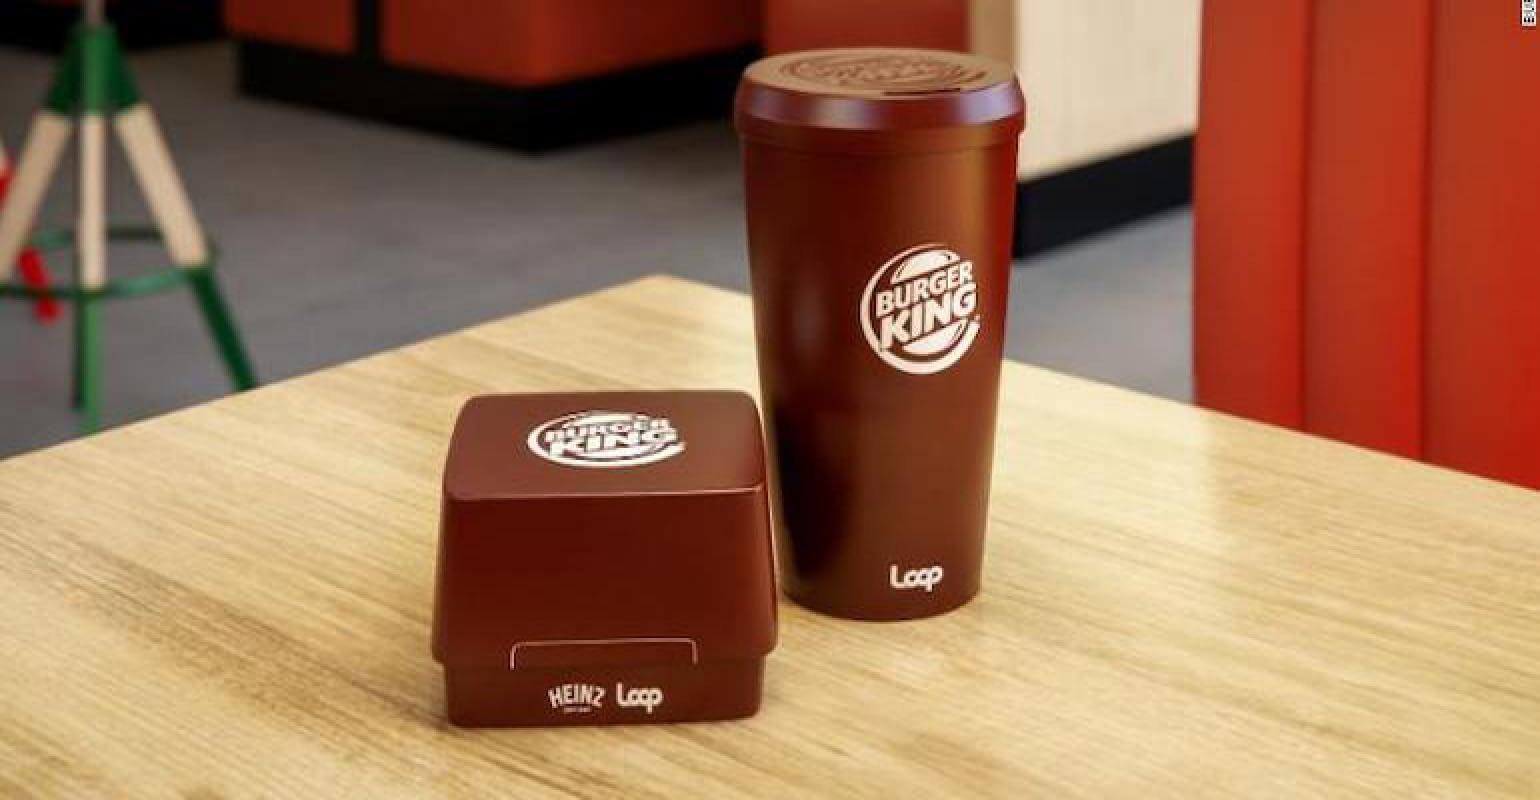 Burger King to try reusable Packaging, partners with Terracycle